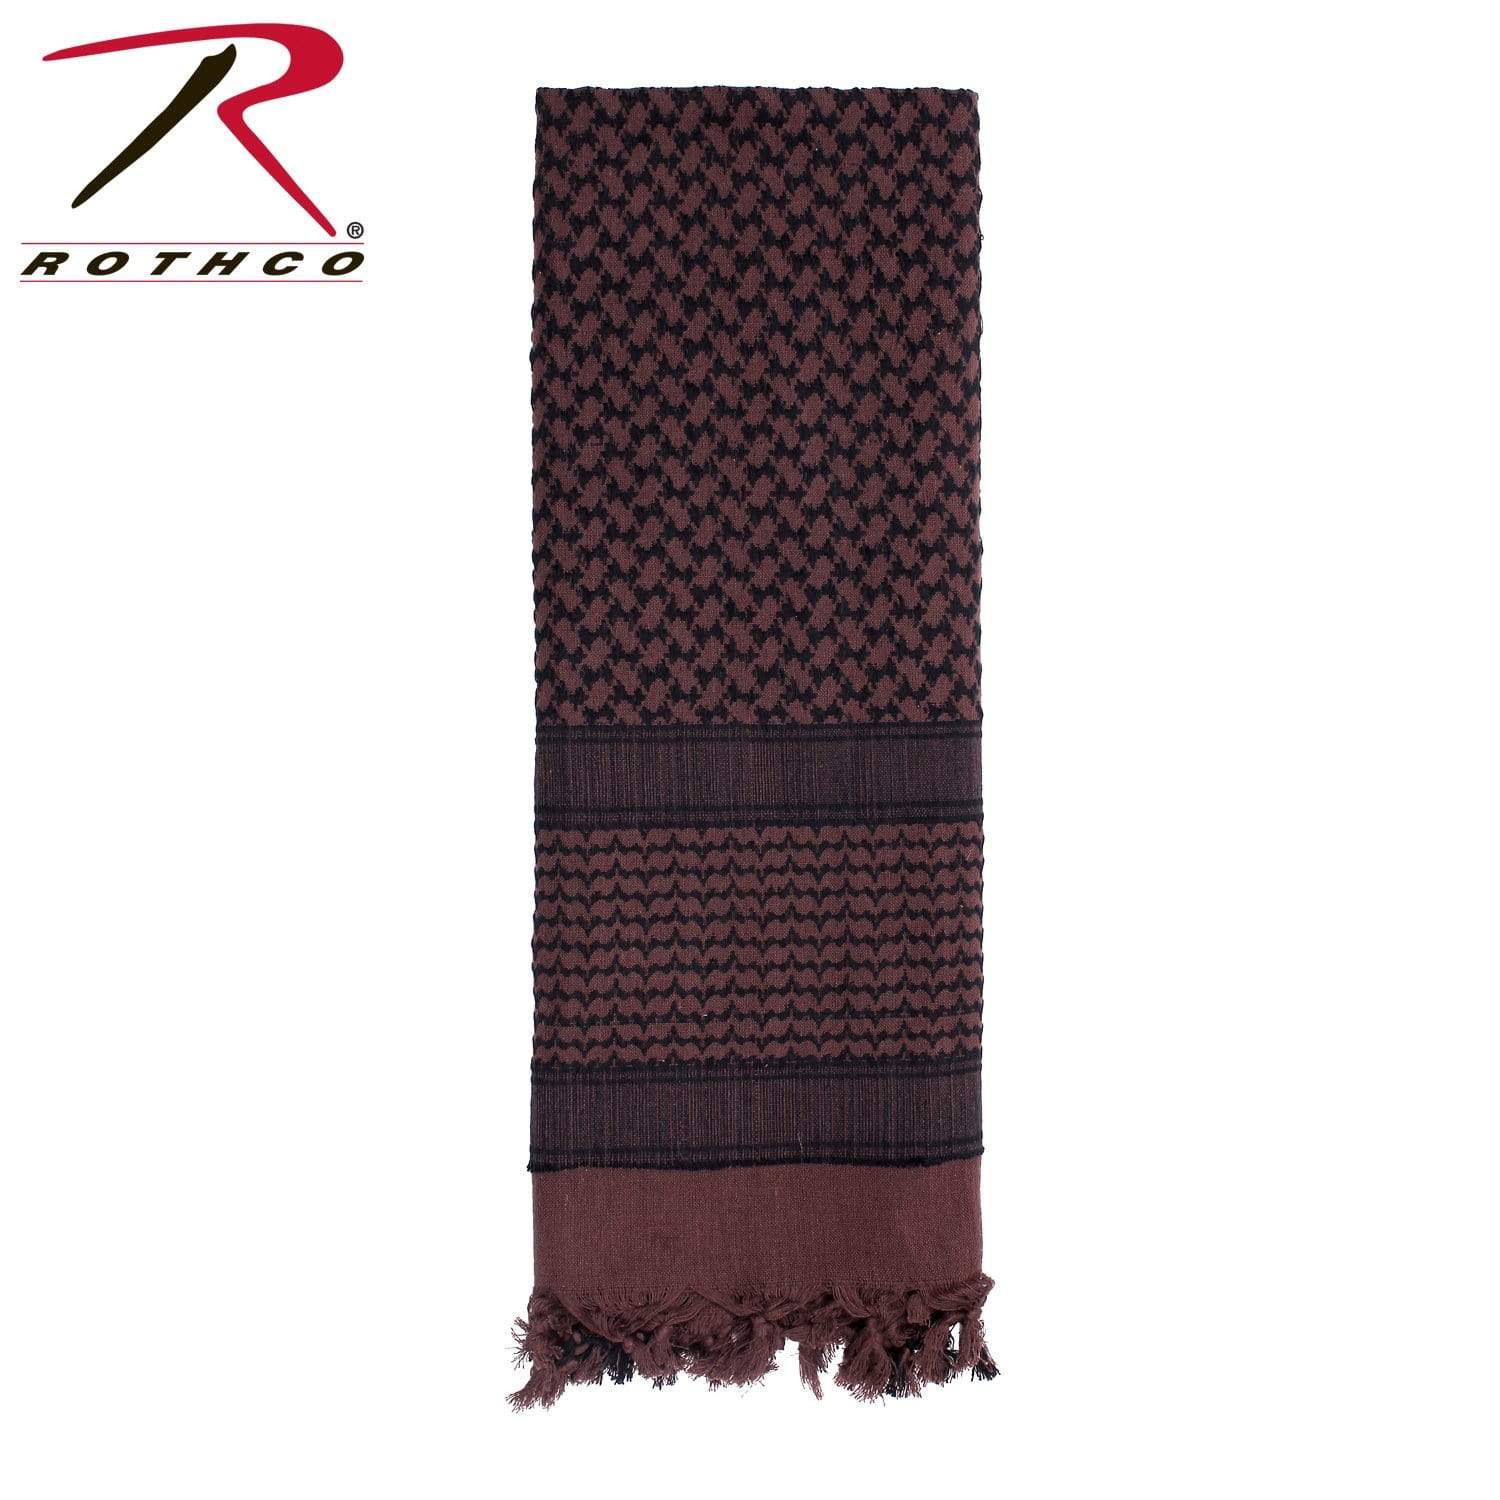 Rothco Shemagh Tactical Desert Keffiyeh Scarf - Brown - Eminent Paintball And Airsoft